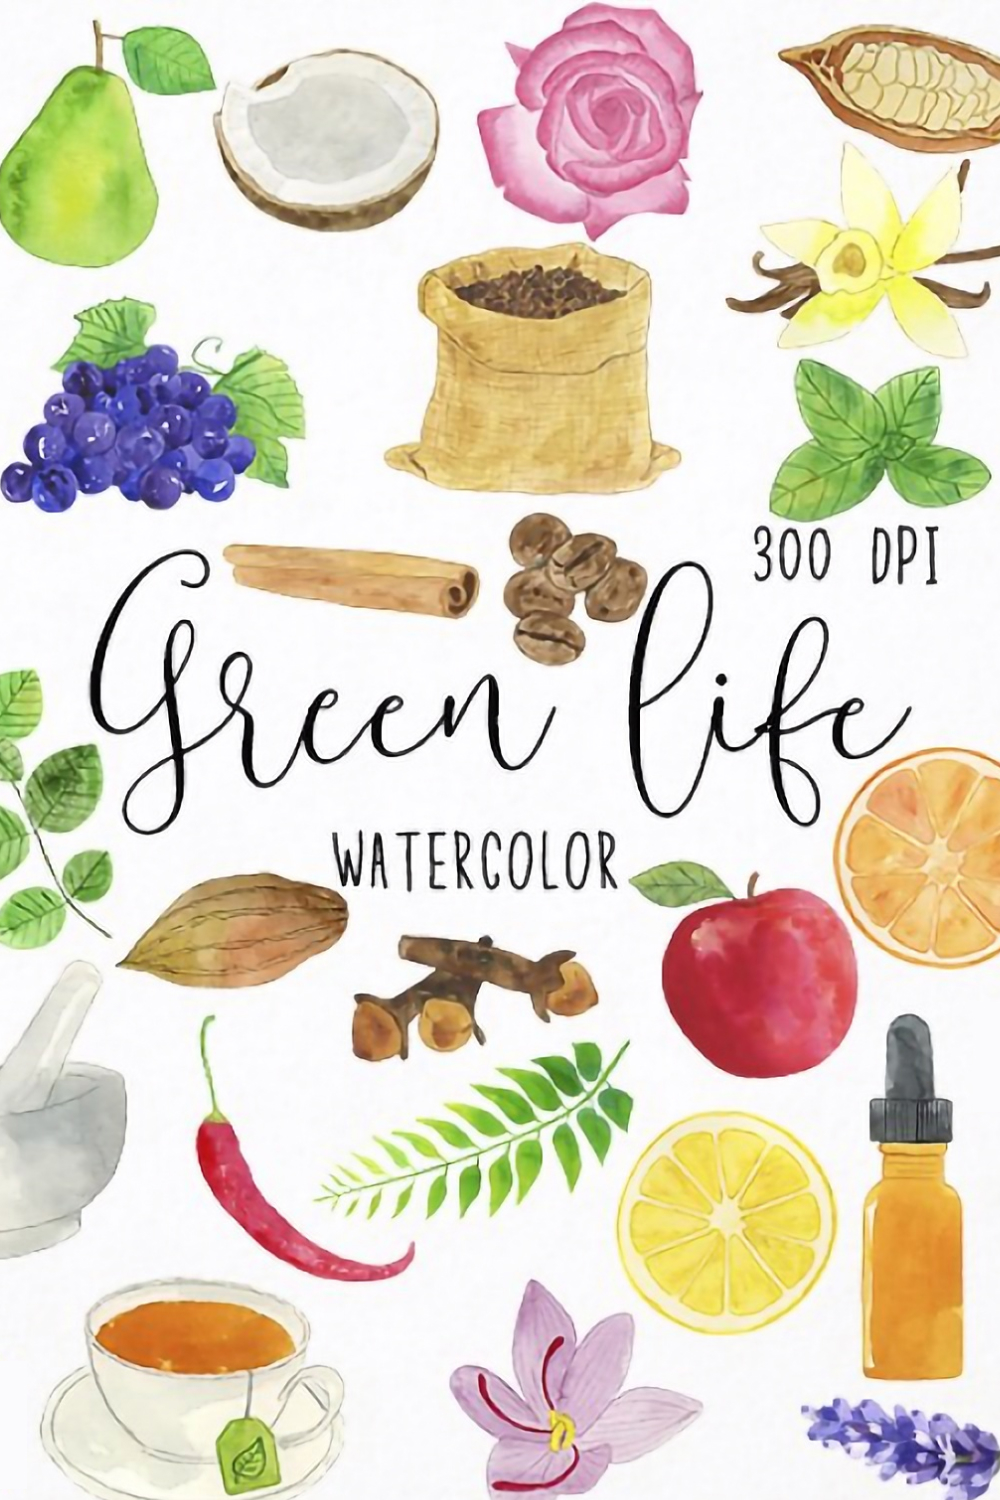 Watercolor green life clipart of pinterest.